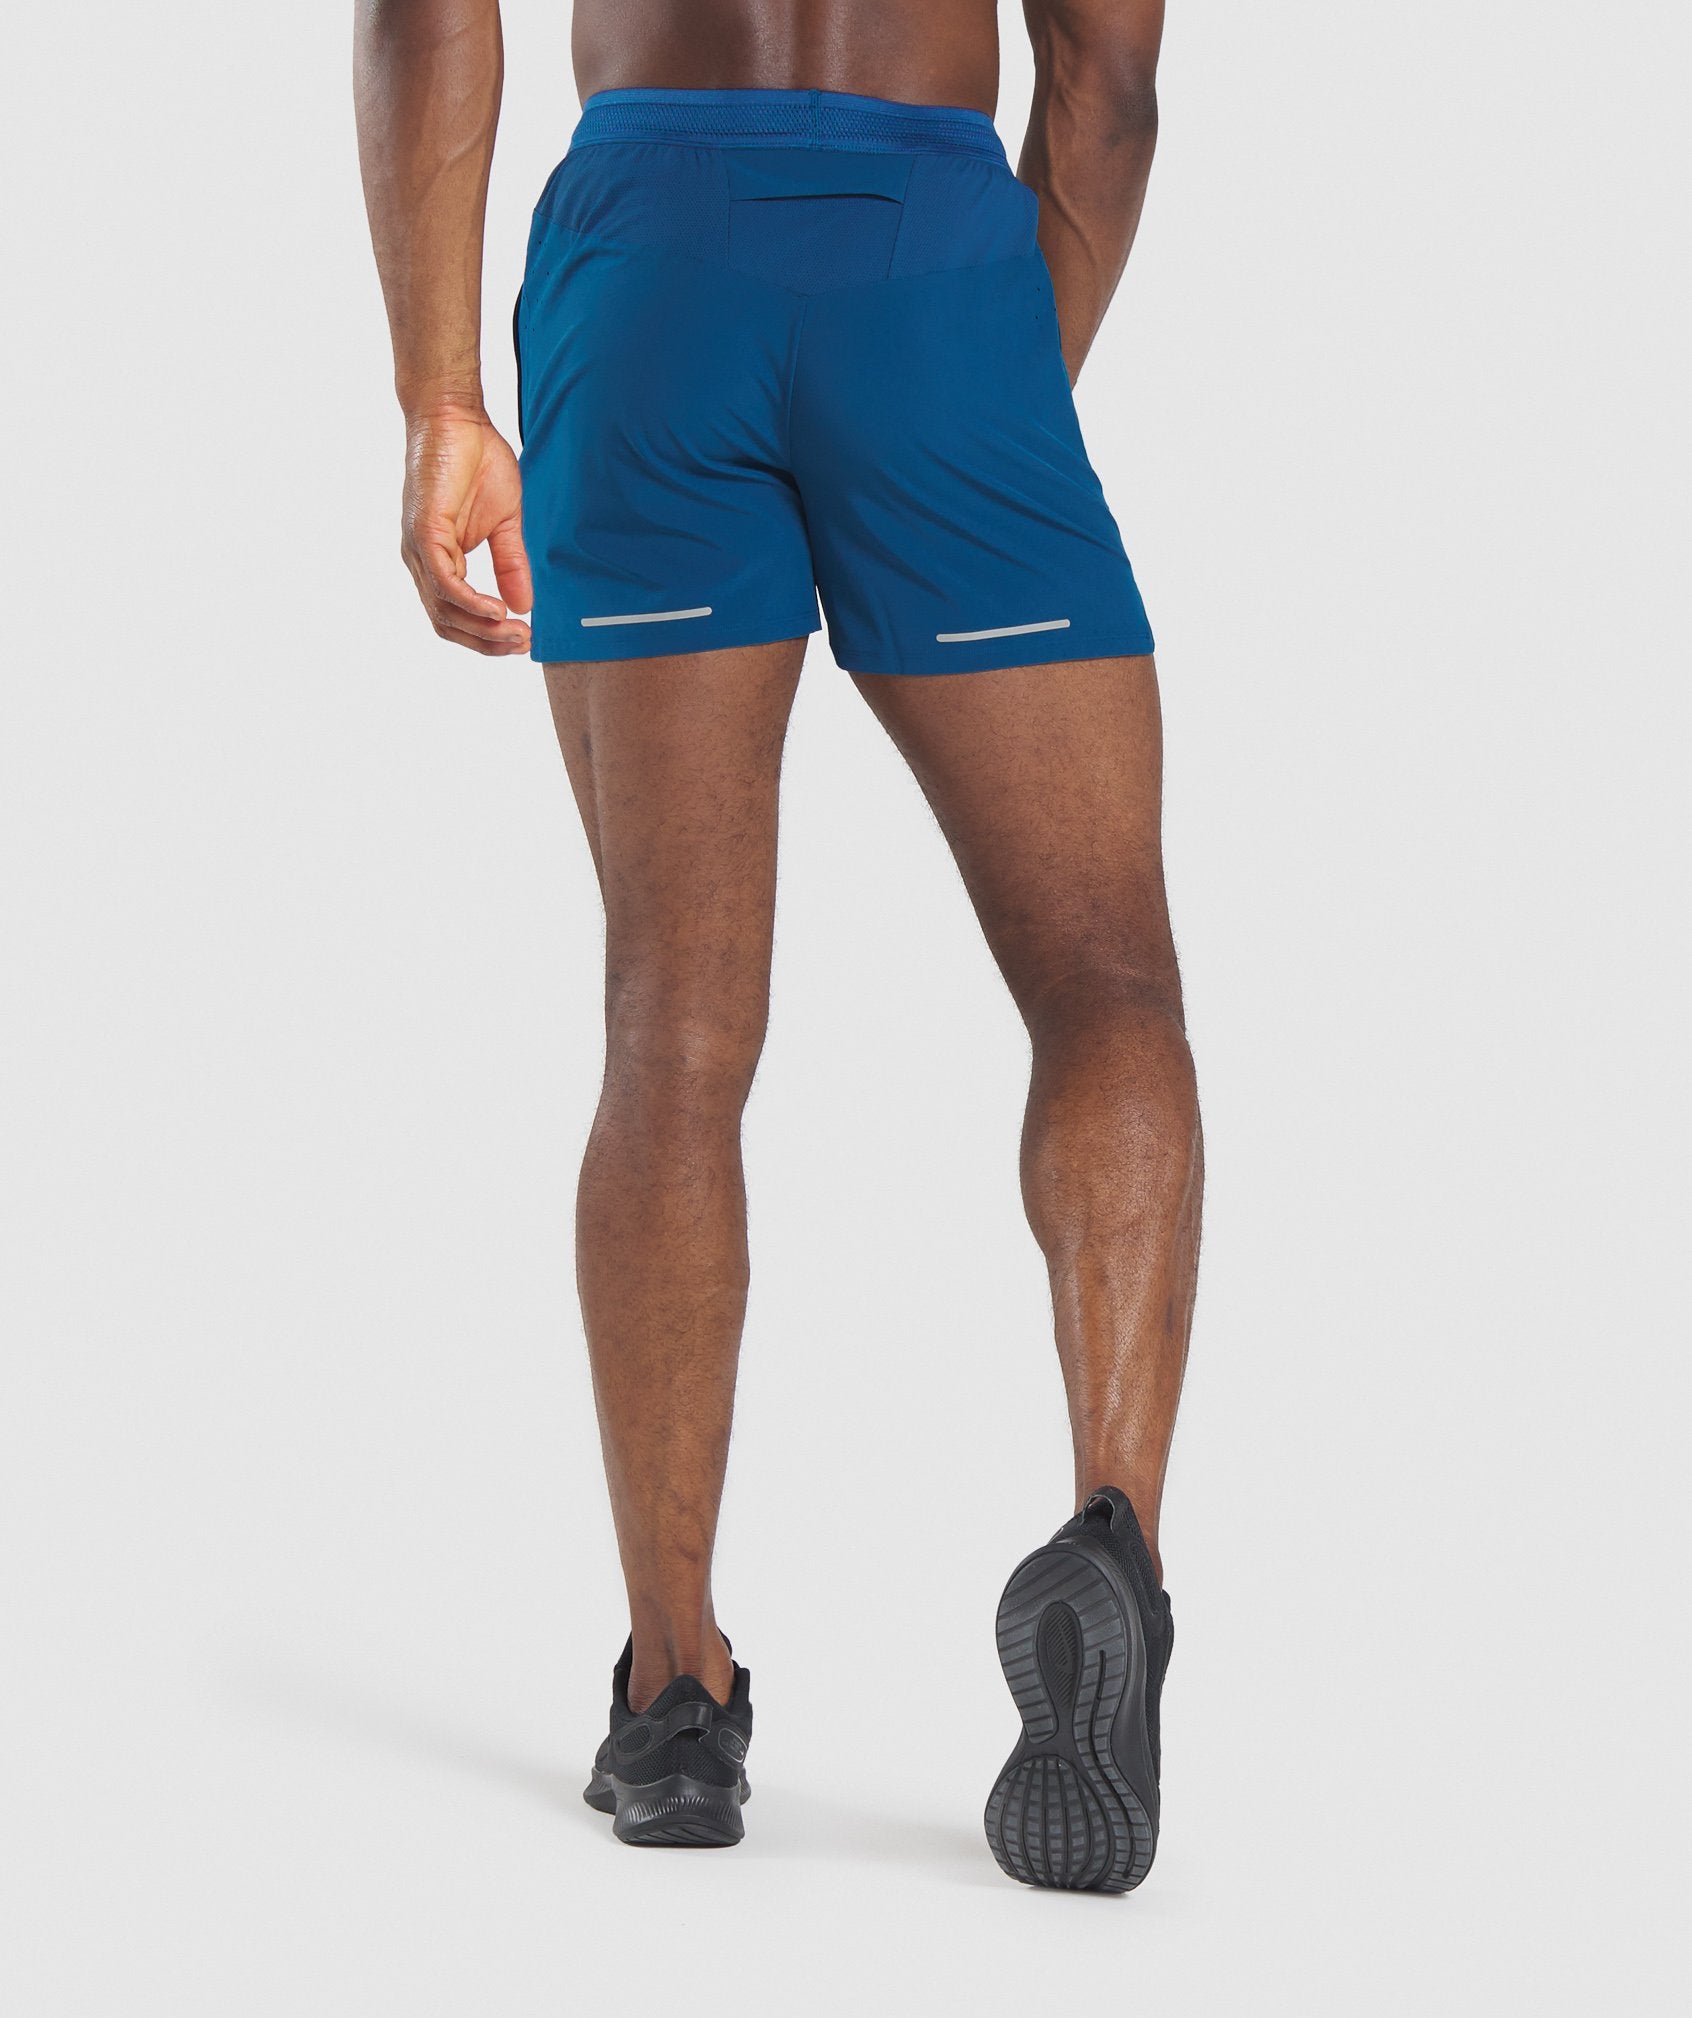 Speed 5" Shorts in Petrol Blue - view 3